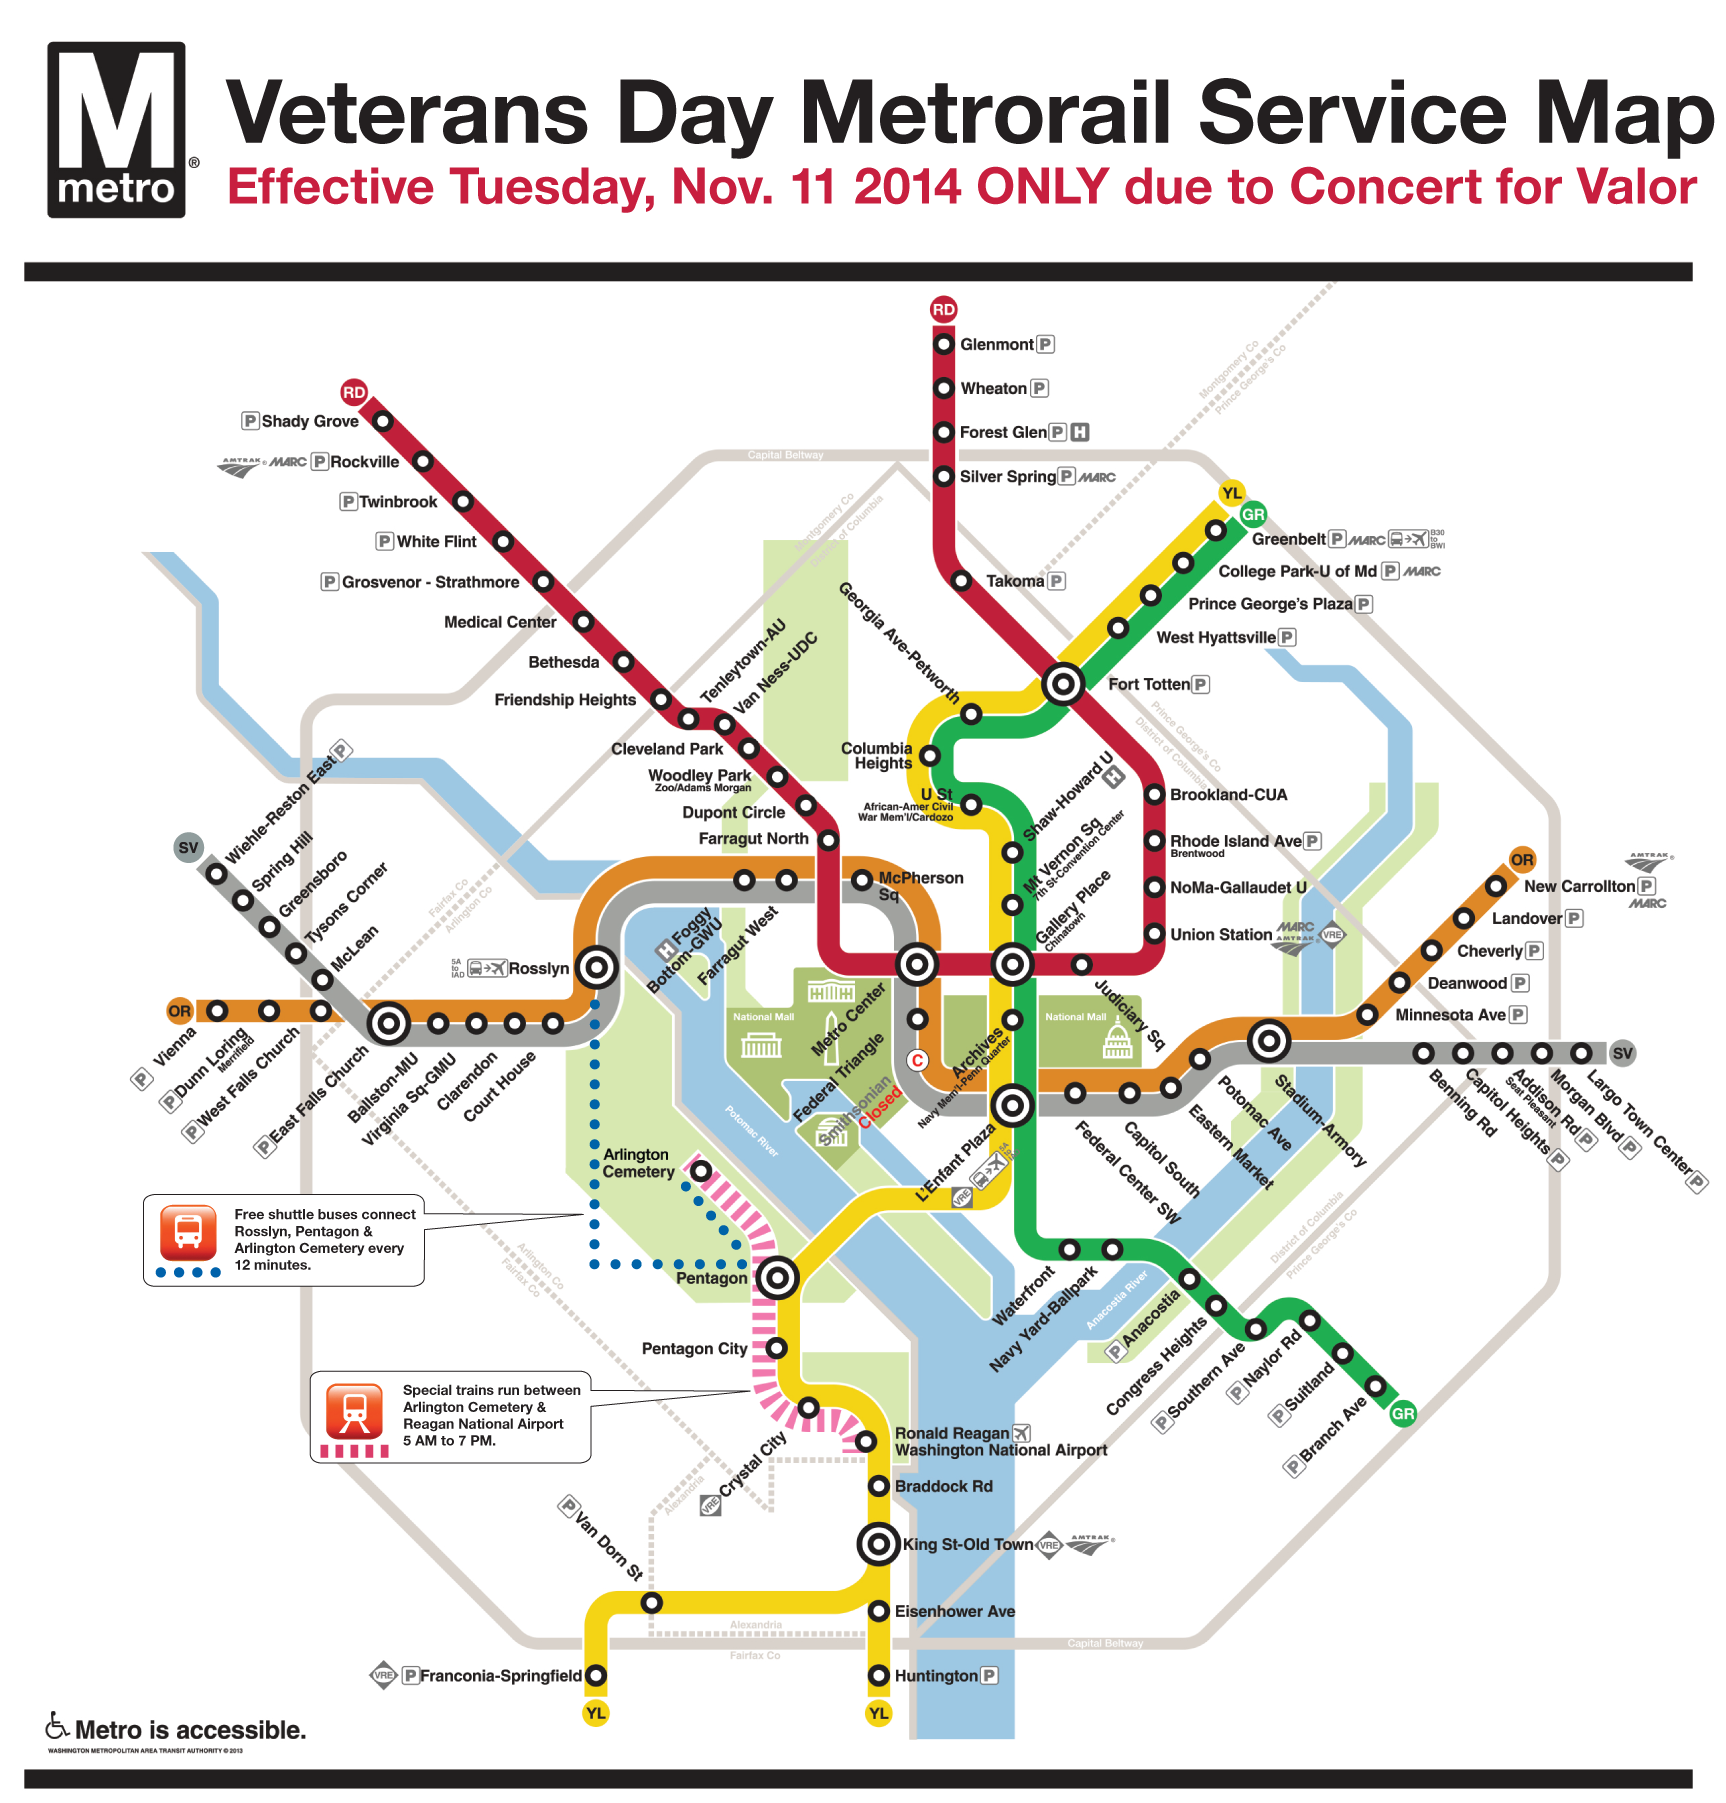 Blue Line trains will become Yellow Line trains on Veterans Day. (Graphic: Washington Metropolitan Area Transit Authority)